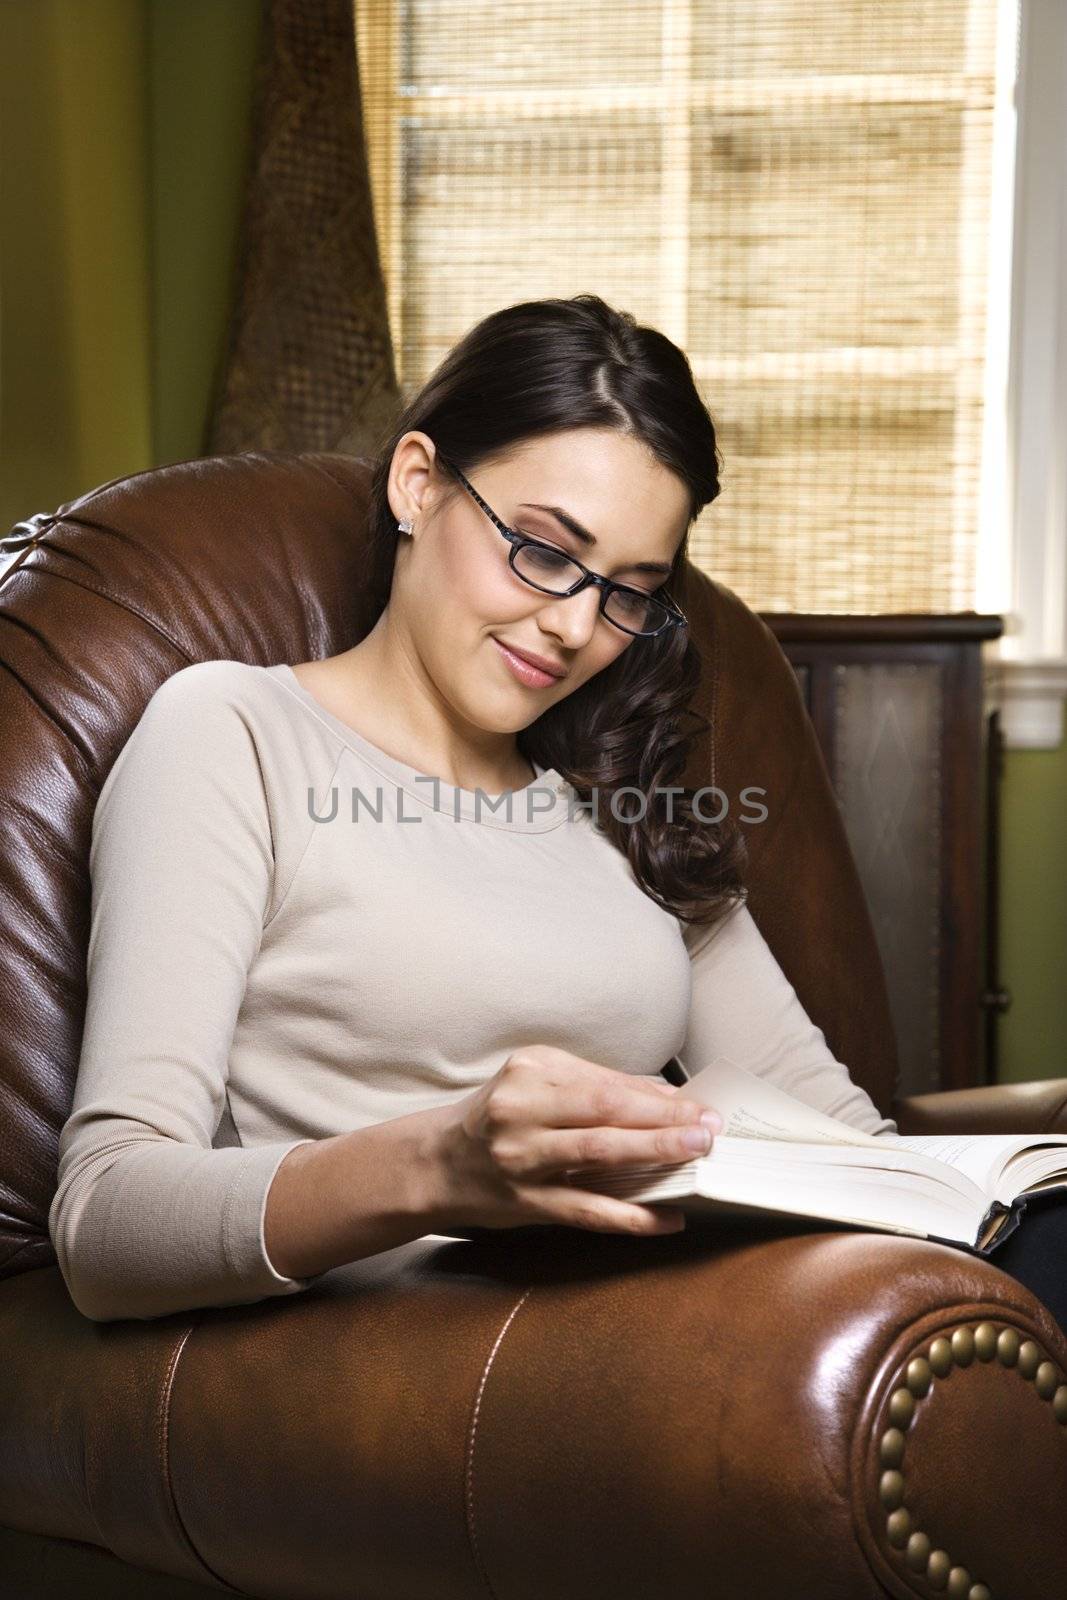 Caucasian/Hispanic young woman sitting in leather chair reading a book.